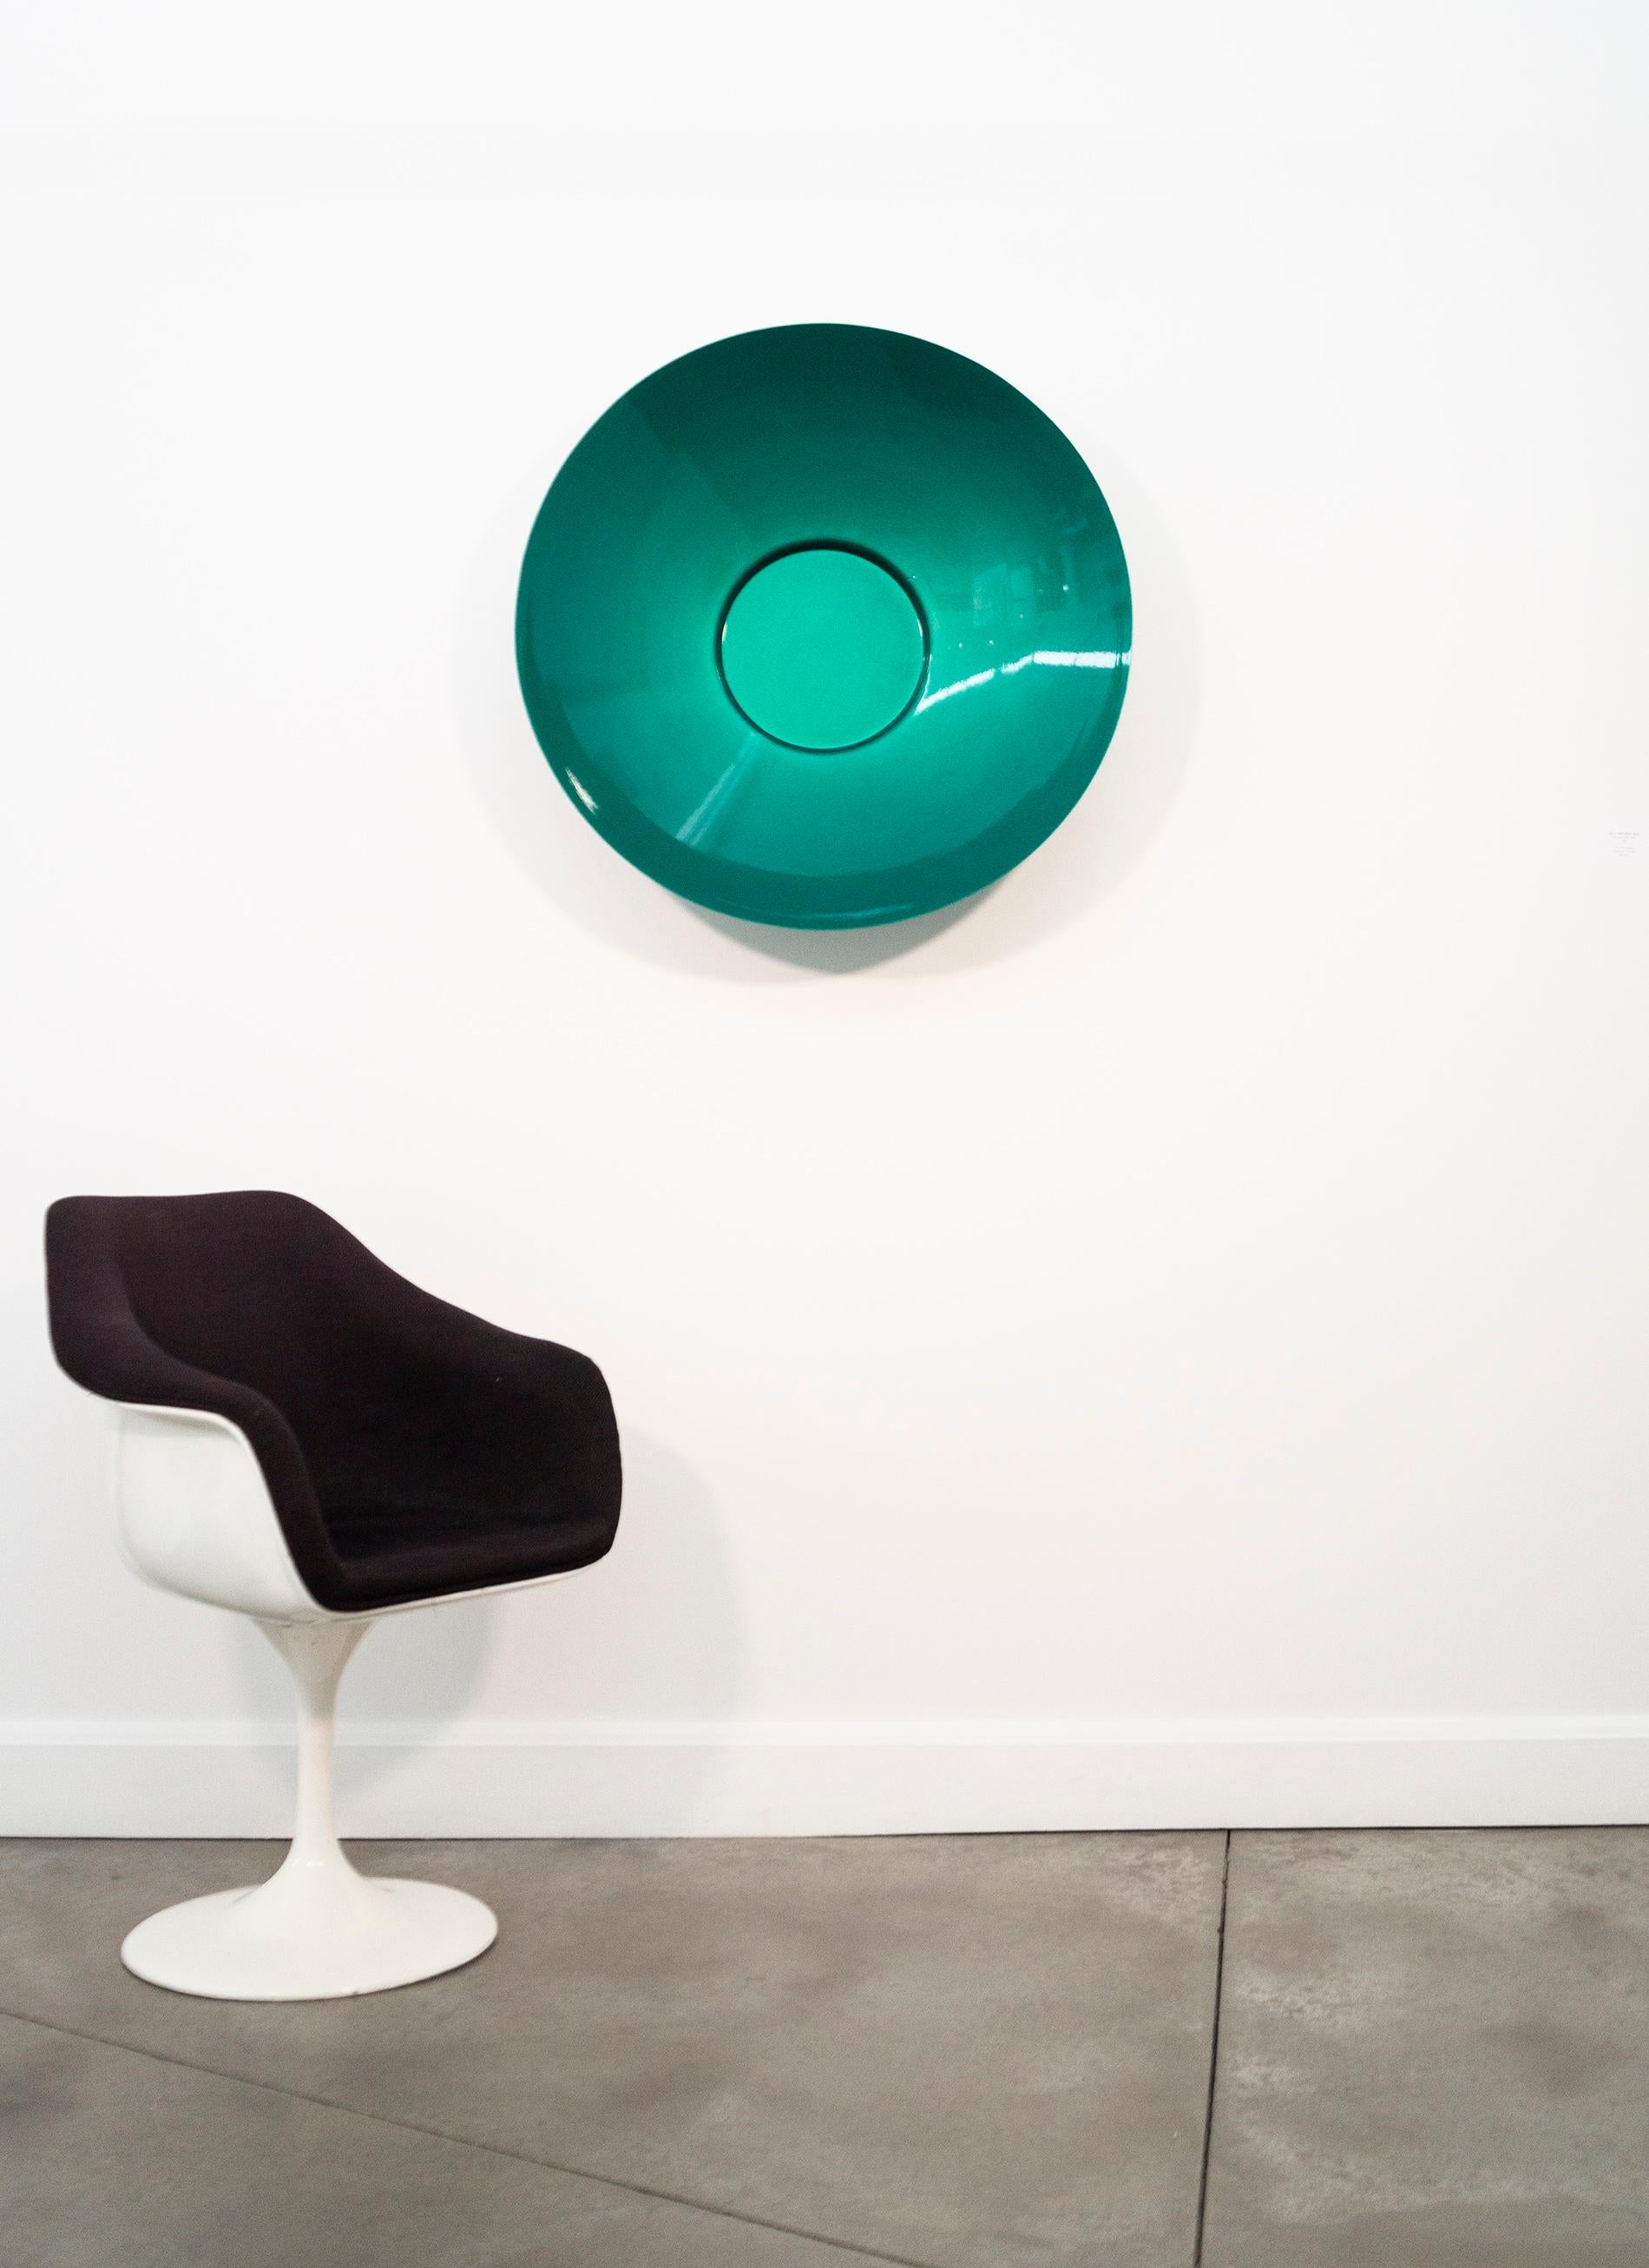 Inspired by ancient vessels, Marlene Hilton Moore’s colourful, contemporary wall sculptures are made from polished powder-coated steel. The deep blue-green colour of the vessel draws the viewer’s eye to its perfect and pleasing circular form. The